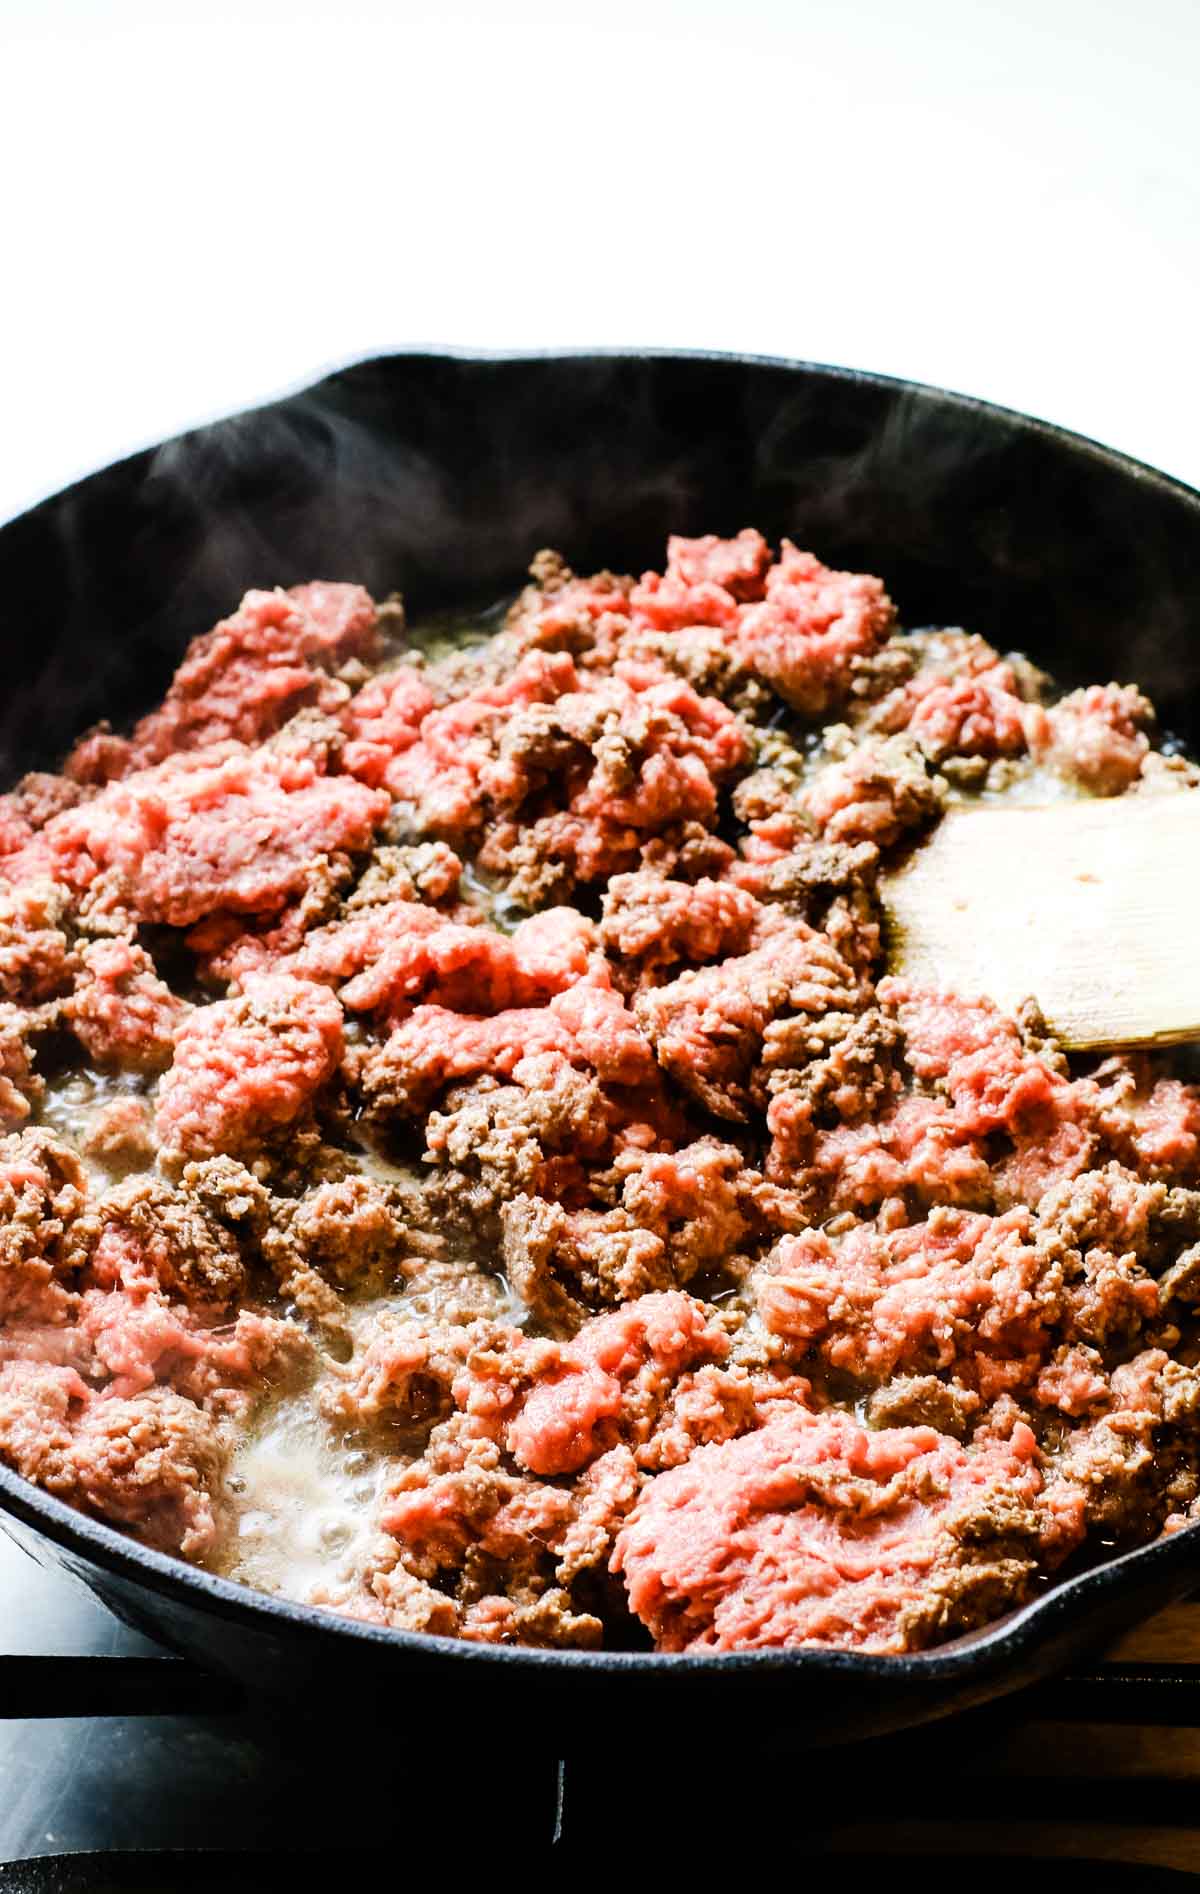 Ground meat in a cast iron skillet slightly cooked